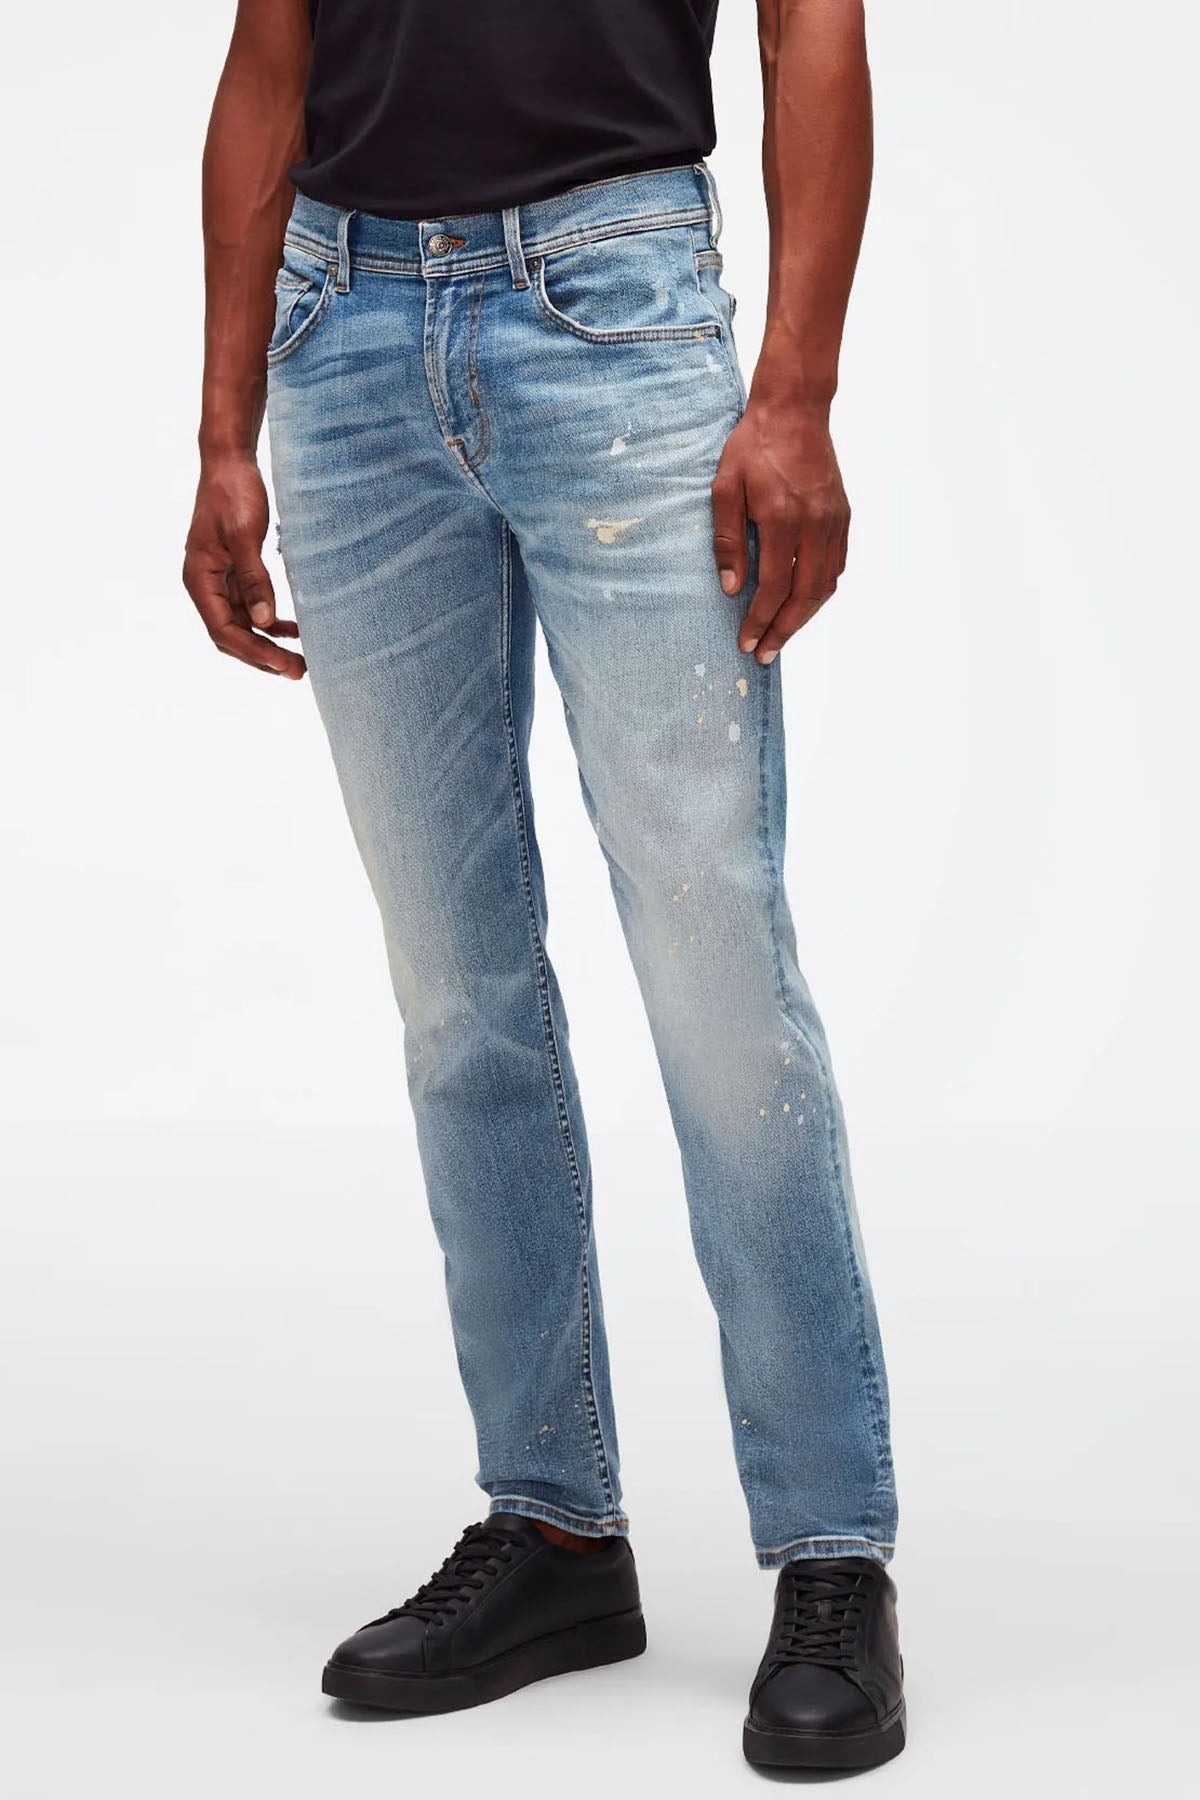 7 For All Mankind Slimmy Tapered Slim Fit Streç Jeans-Libas Trendy Fashion Store